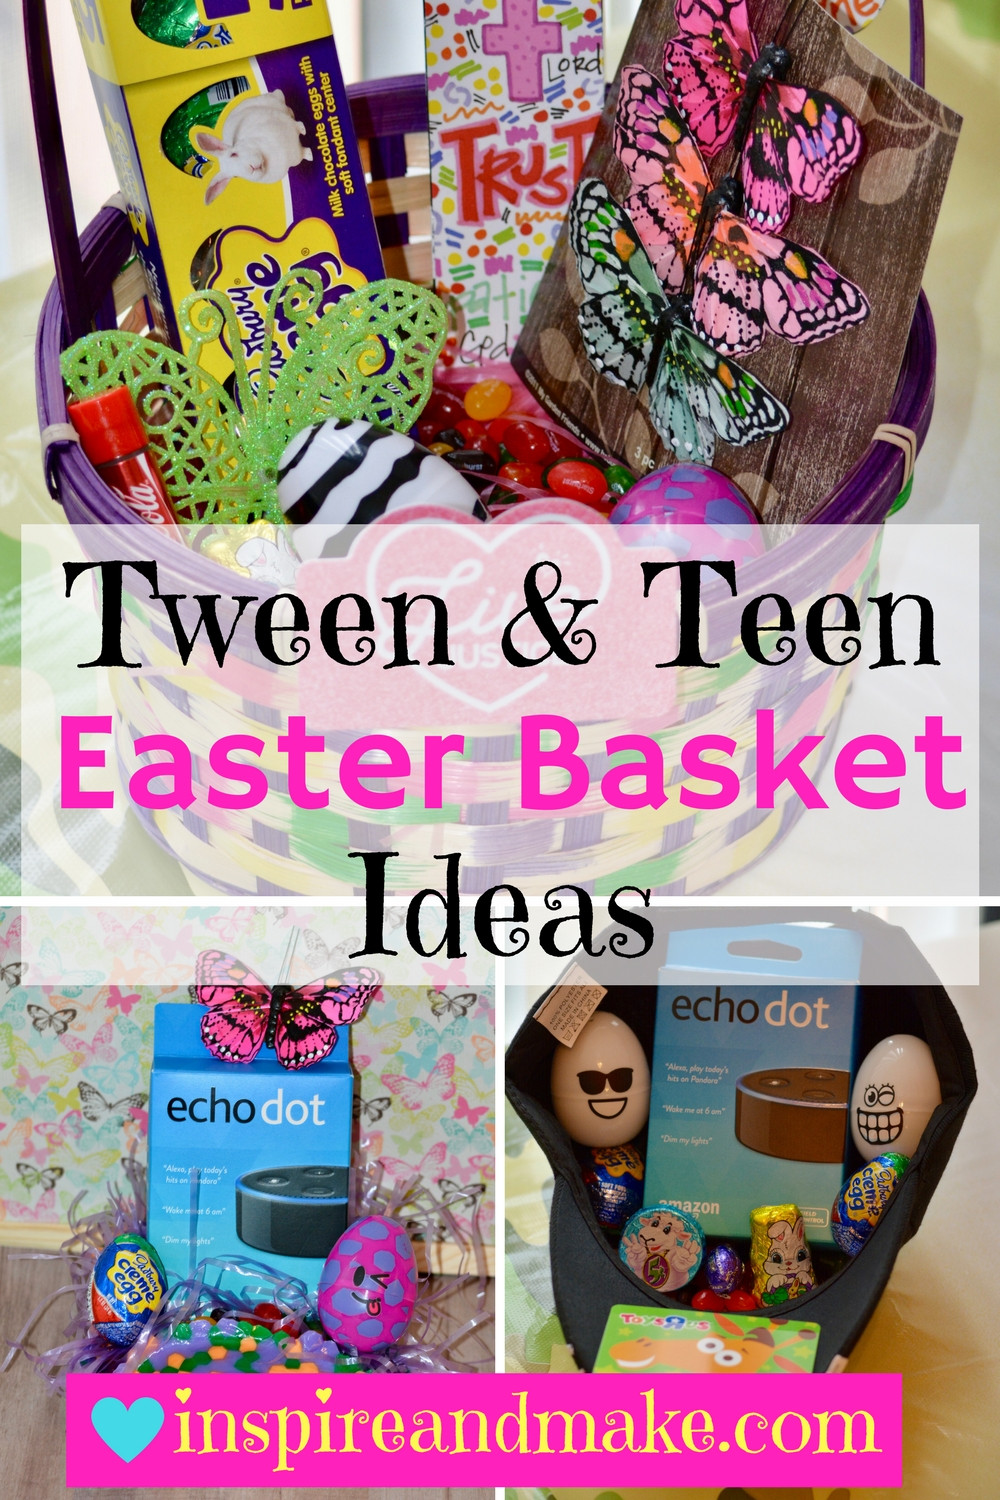 The 22 Best Ideas for Teenager Gift Basket Ideas - Home, Family, Style